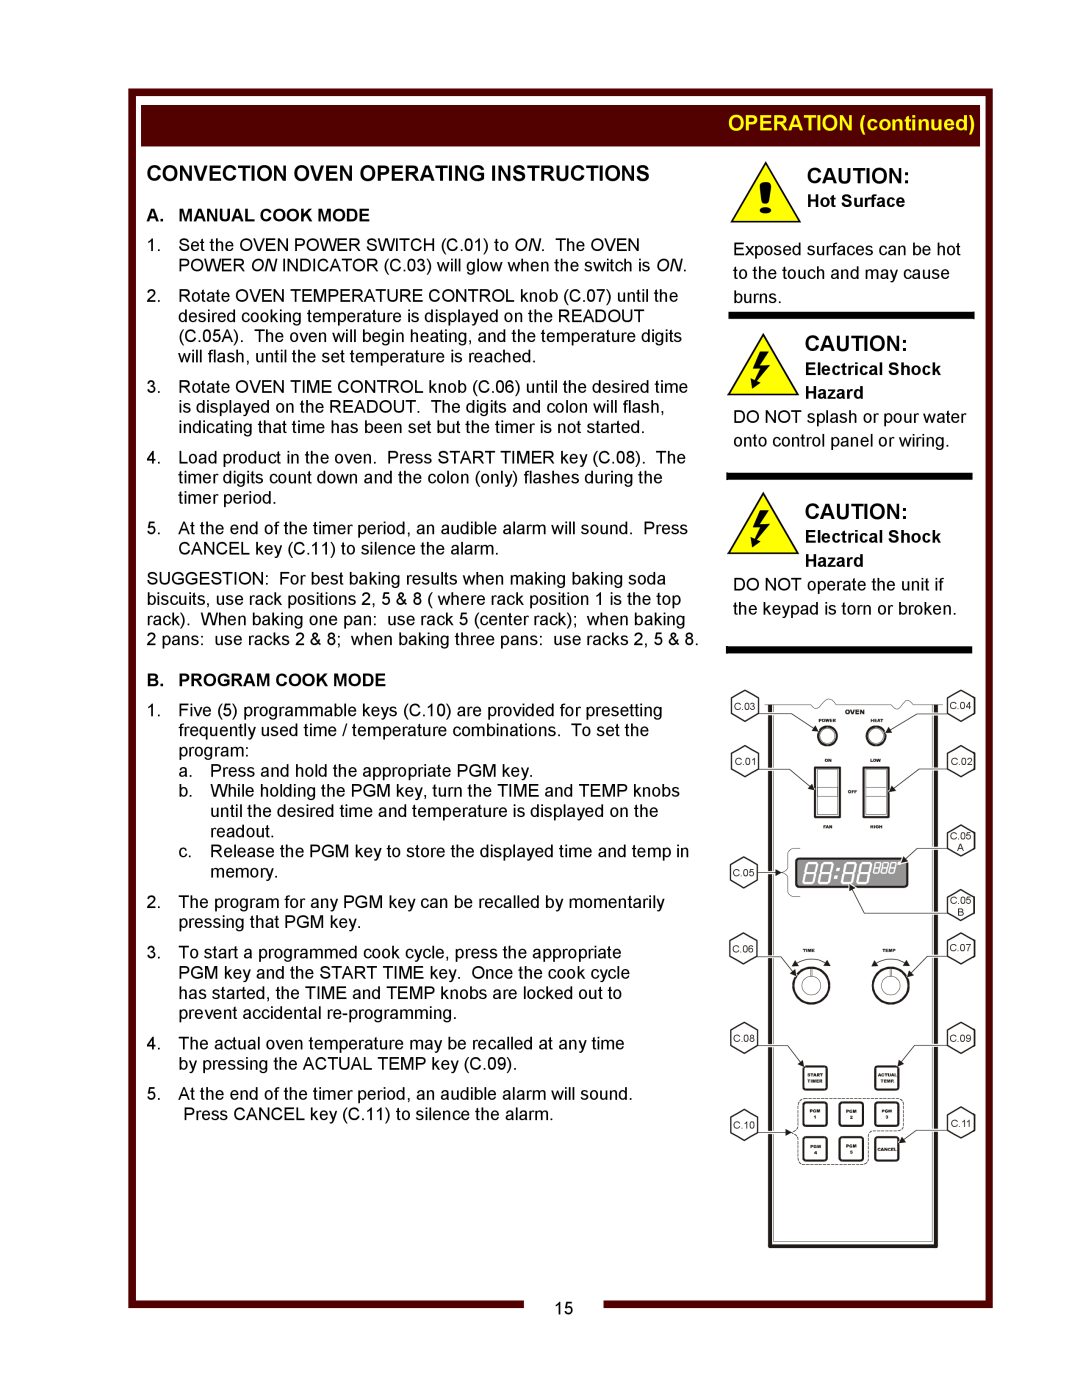 Wells WVOC-4HF Convection Oven Operating Instructions, OPERATION continued, A. Manual Cook Mode, B. Program Cook Mode 